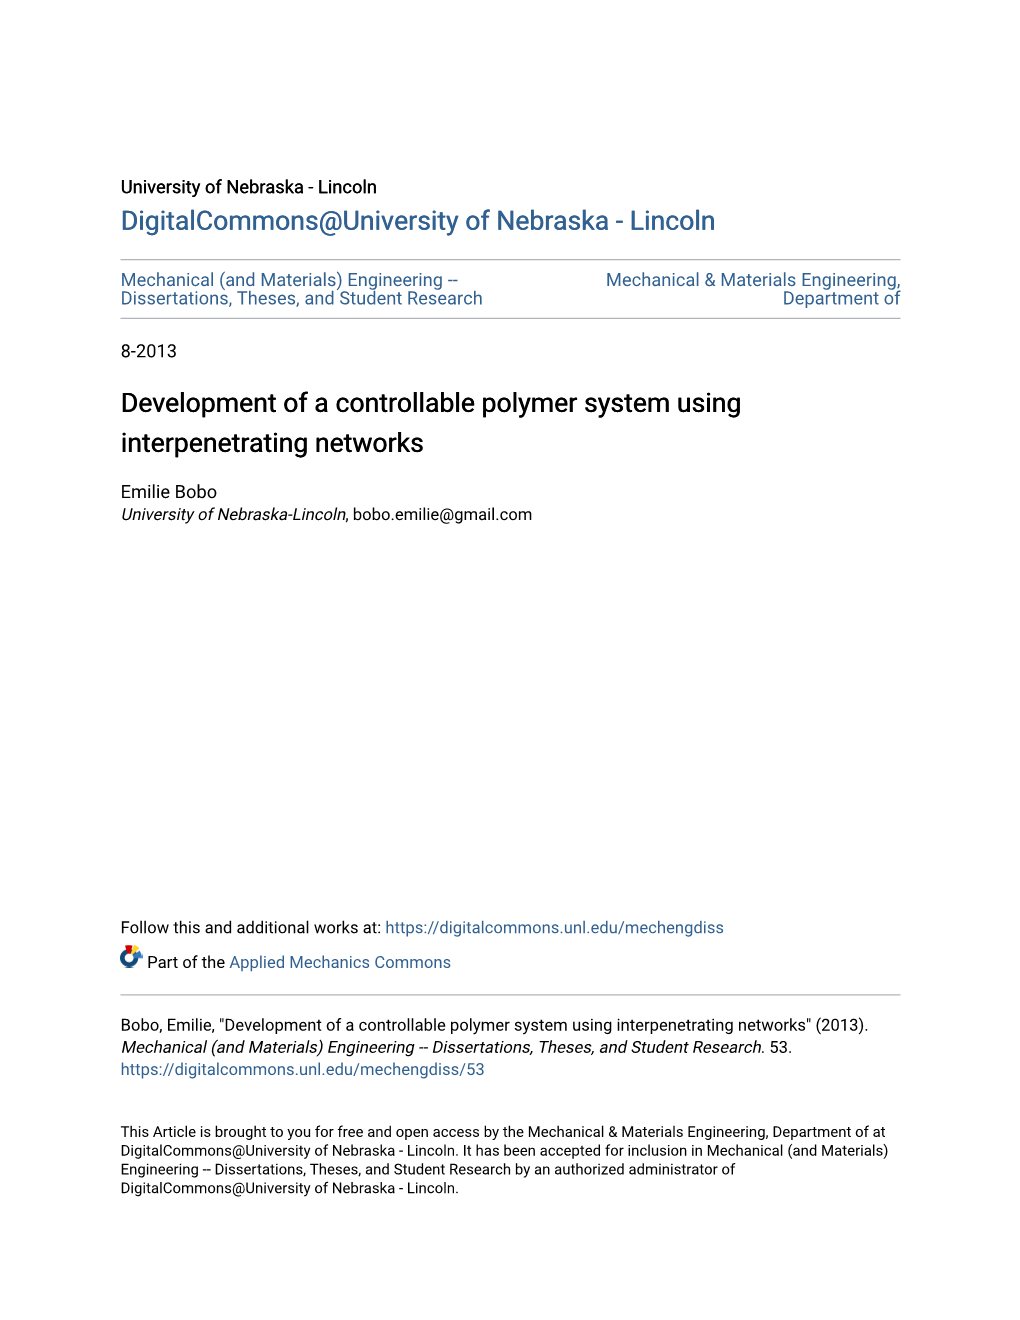 Development of a Controllable Polymer System Using Interpenetrating Networks